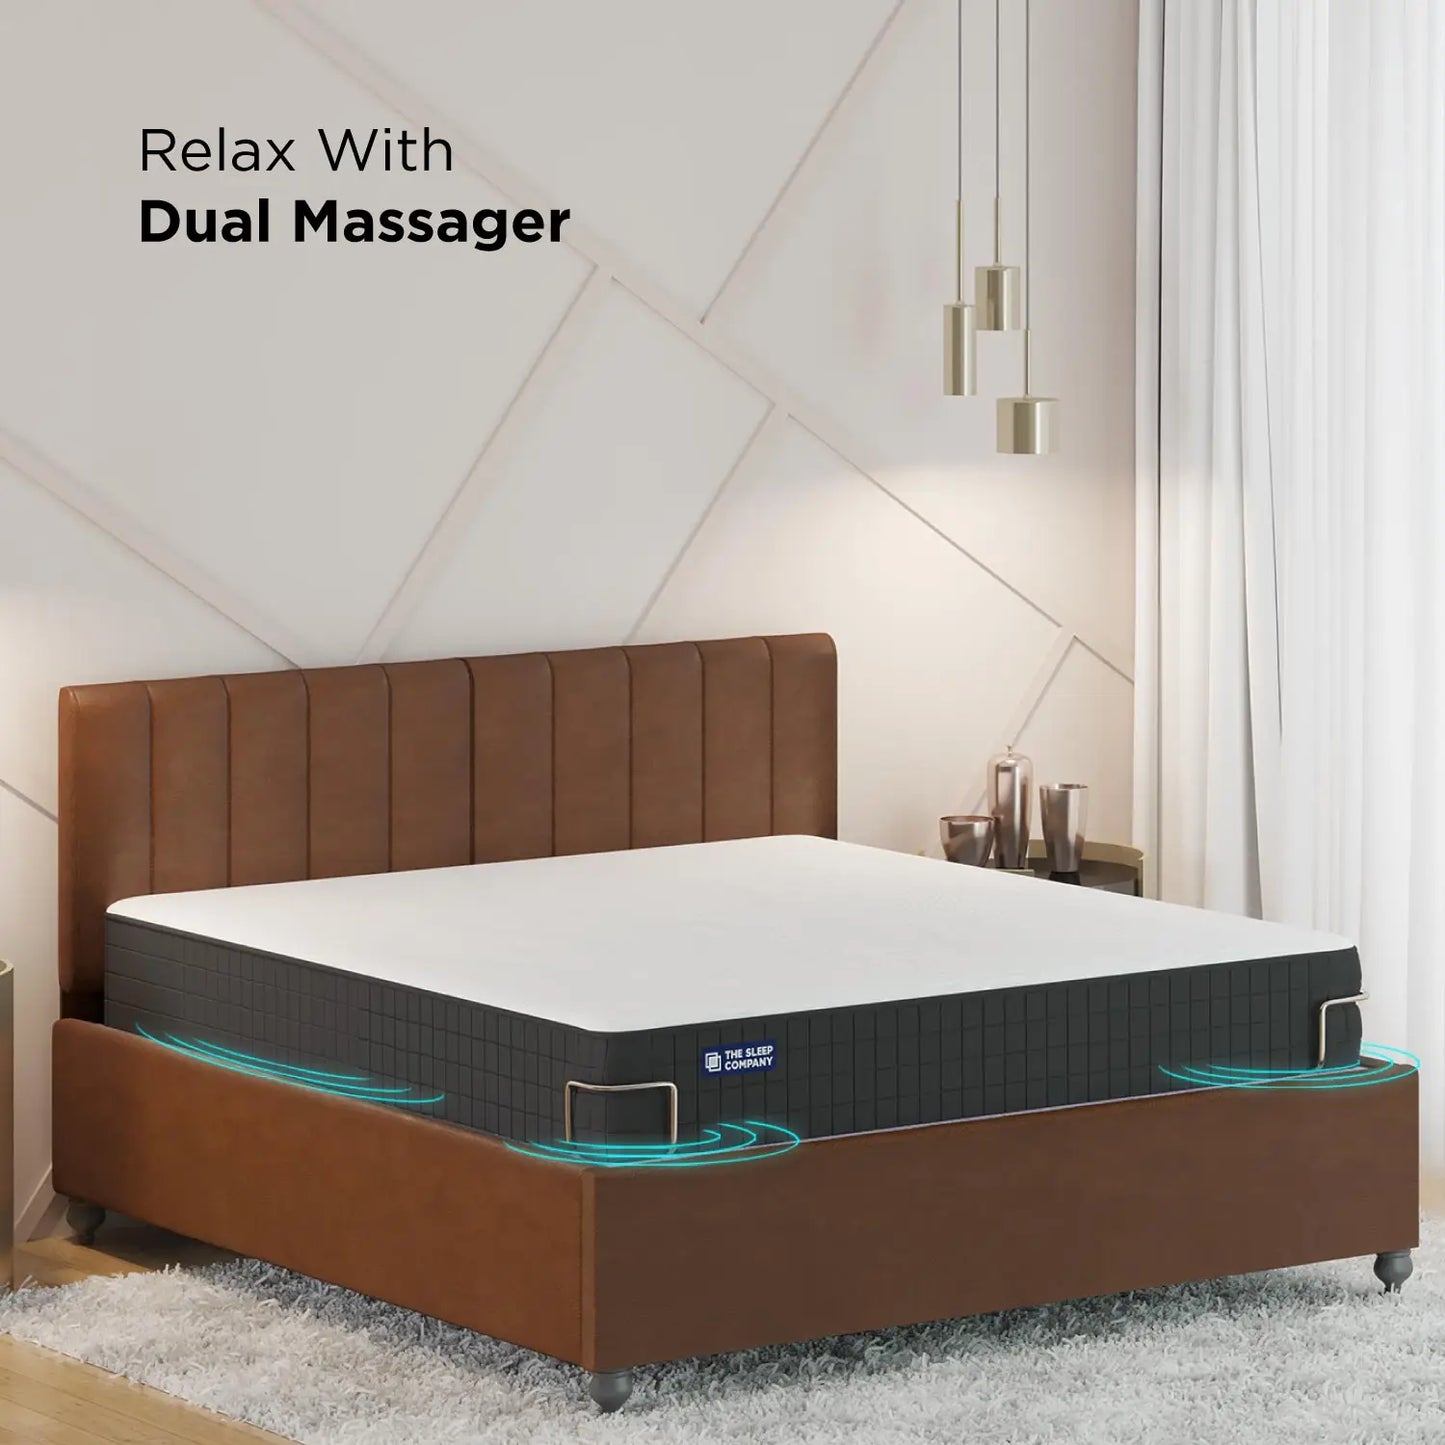 Relax with Dual Massager 